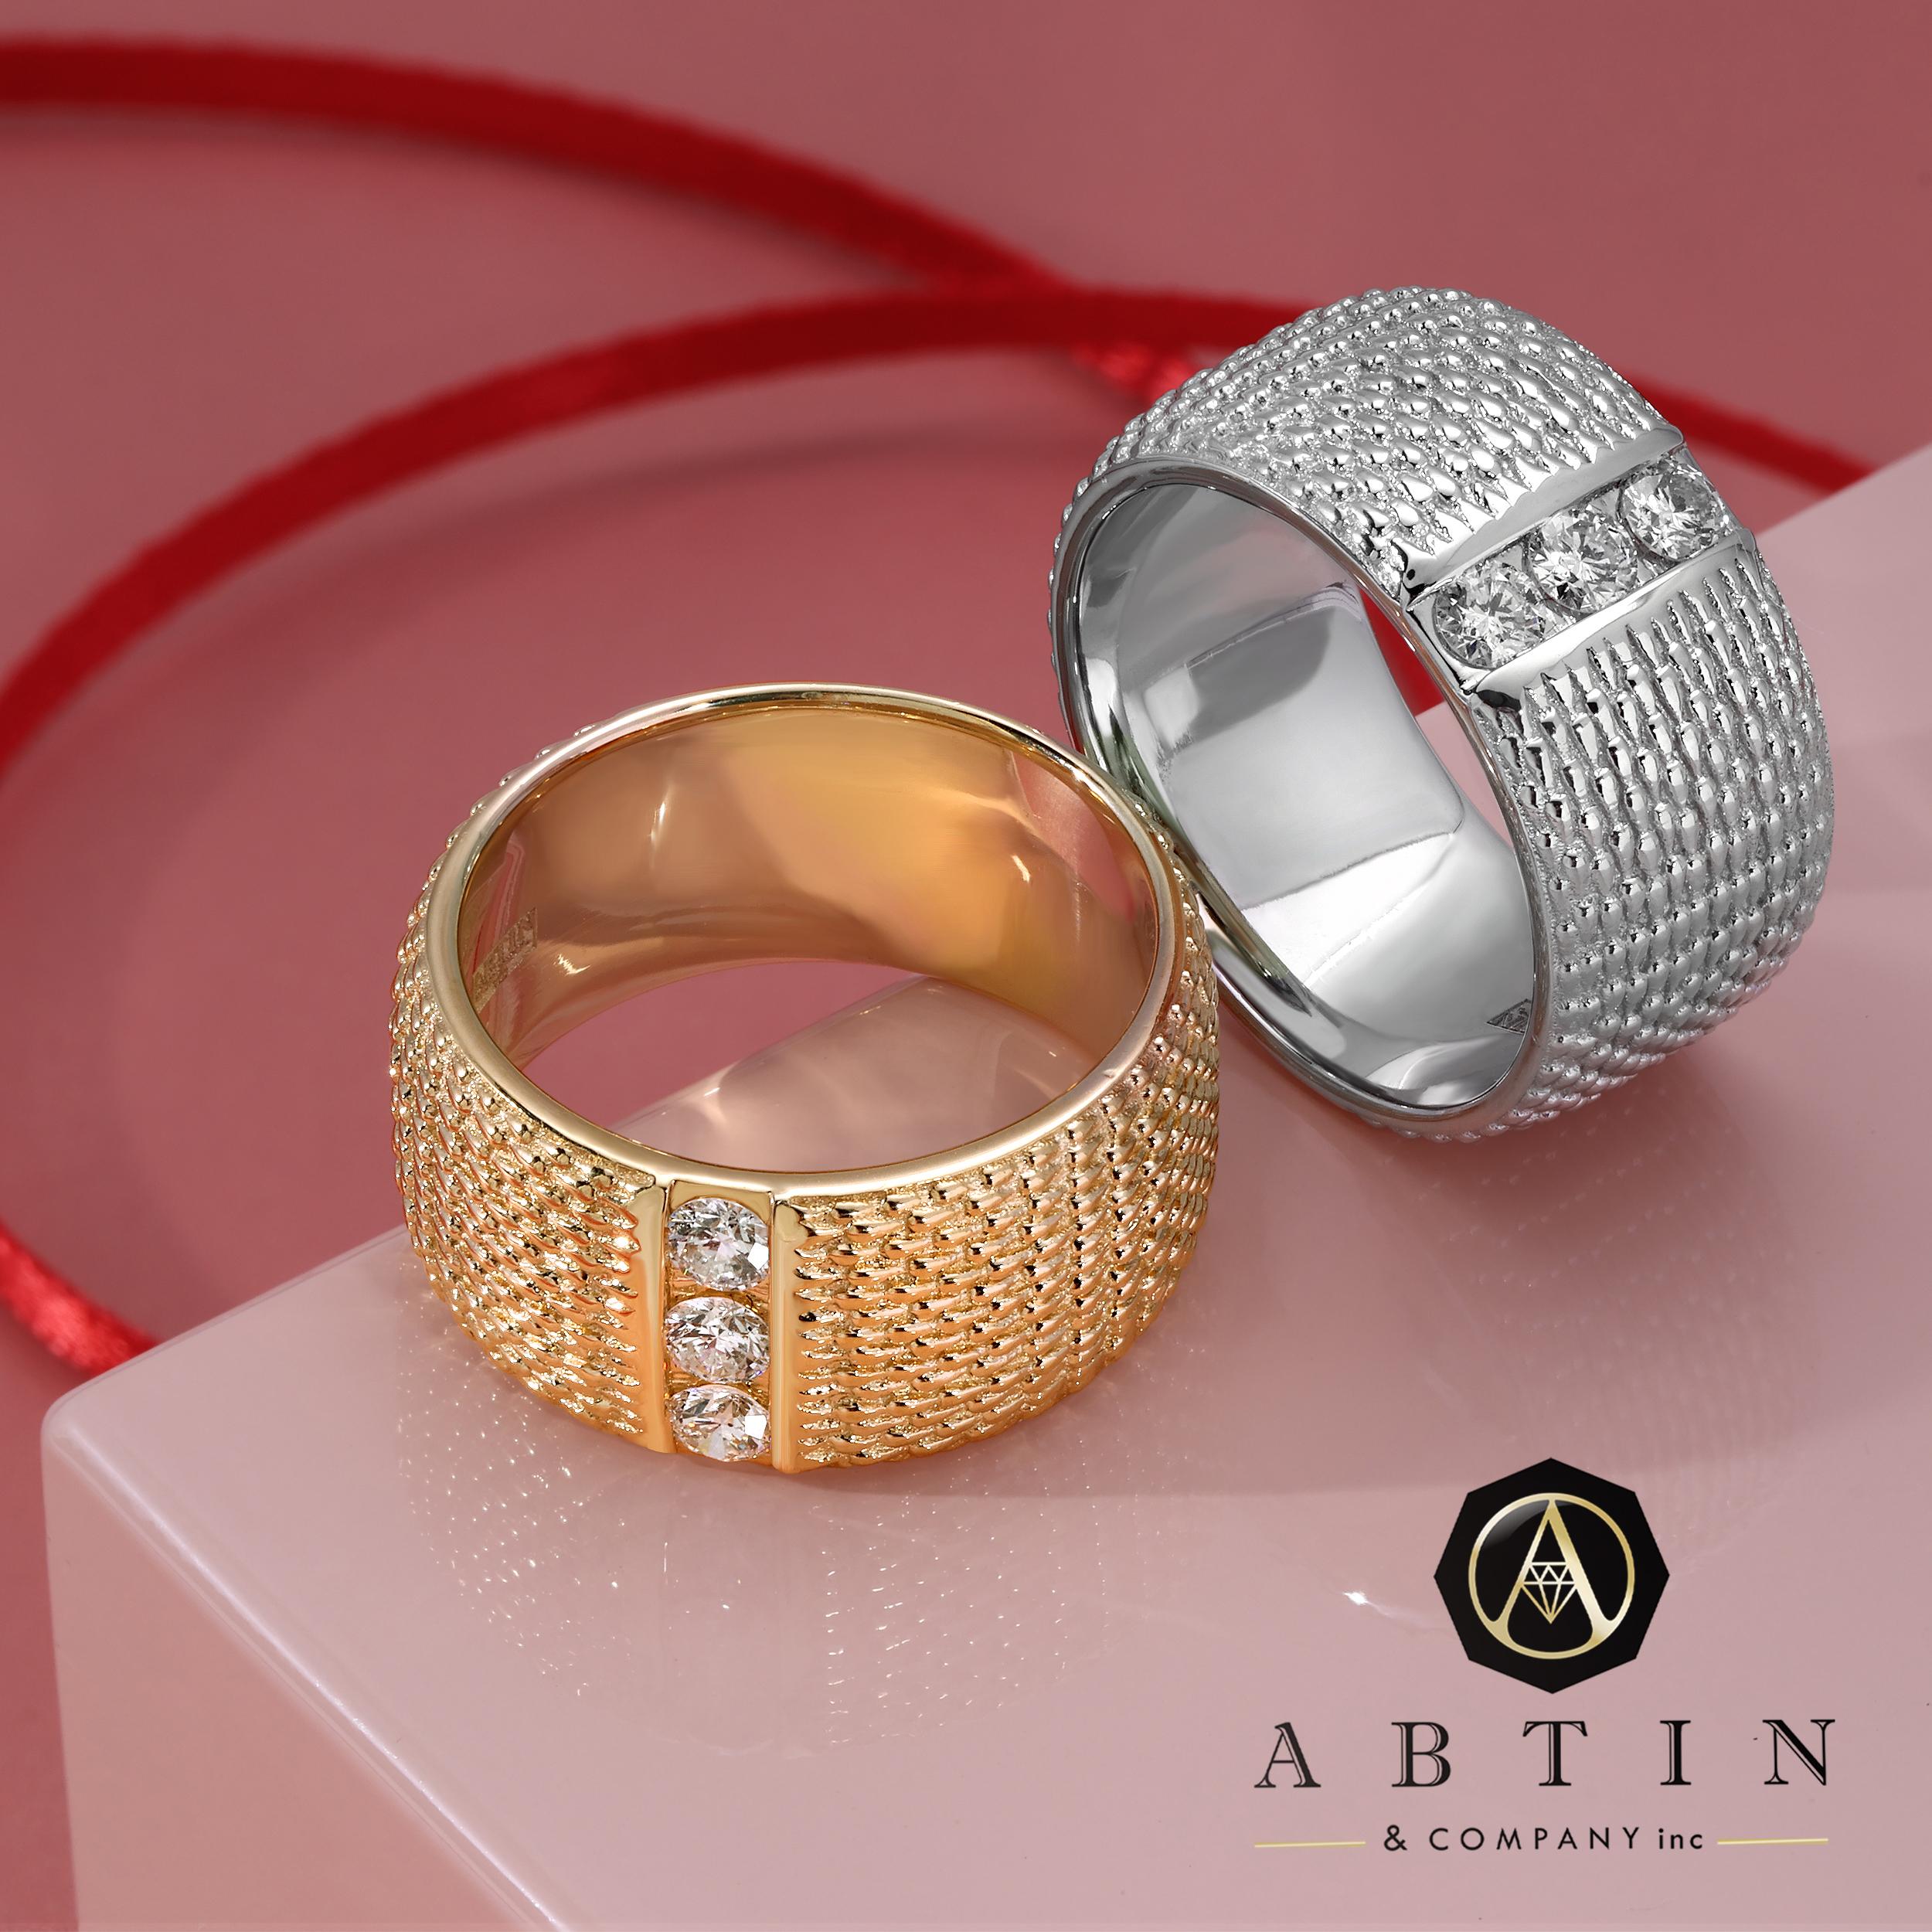 This 14K gold cigar ring showcases an intricate woven design, highlighting a charming rectangular center with three sparkling round diamonds set in 14K gold, totaling 0.31 ct. If you like eye-catching one-of-a-kind jewelry, this ring is for